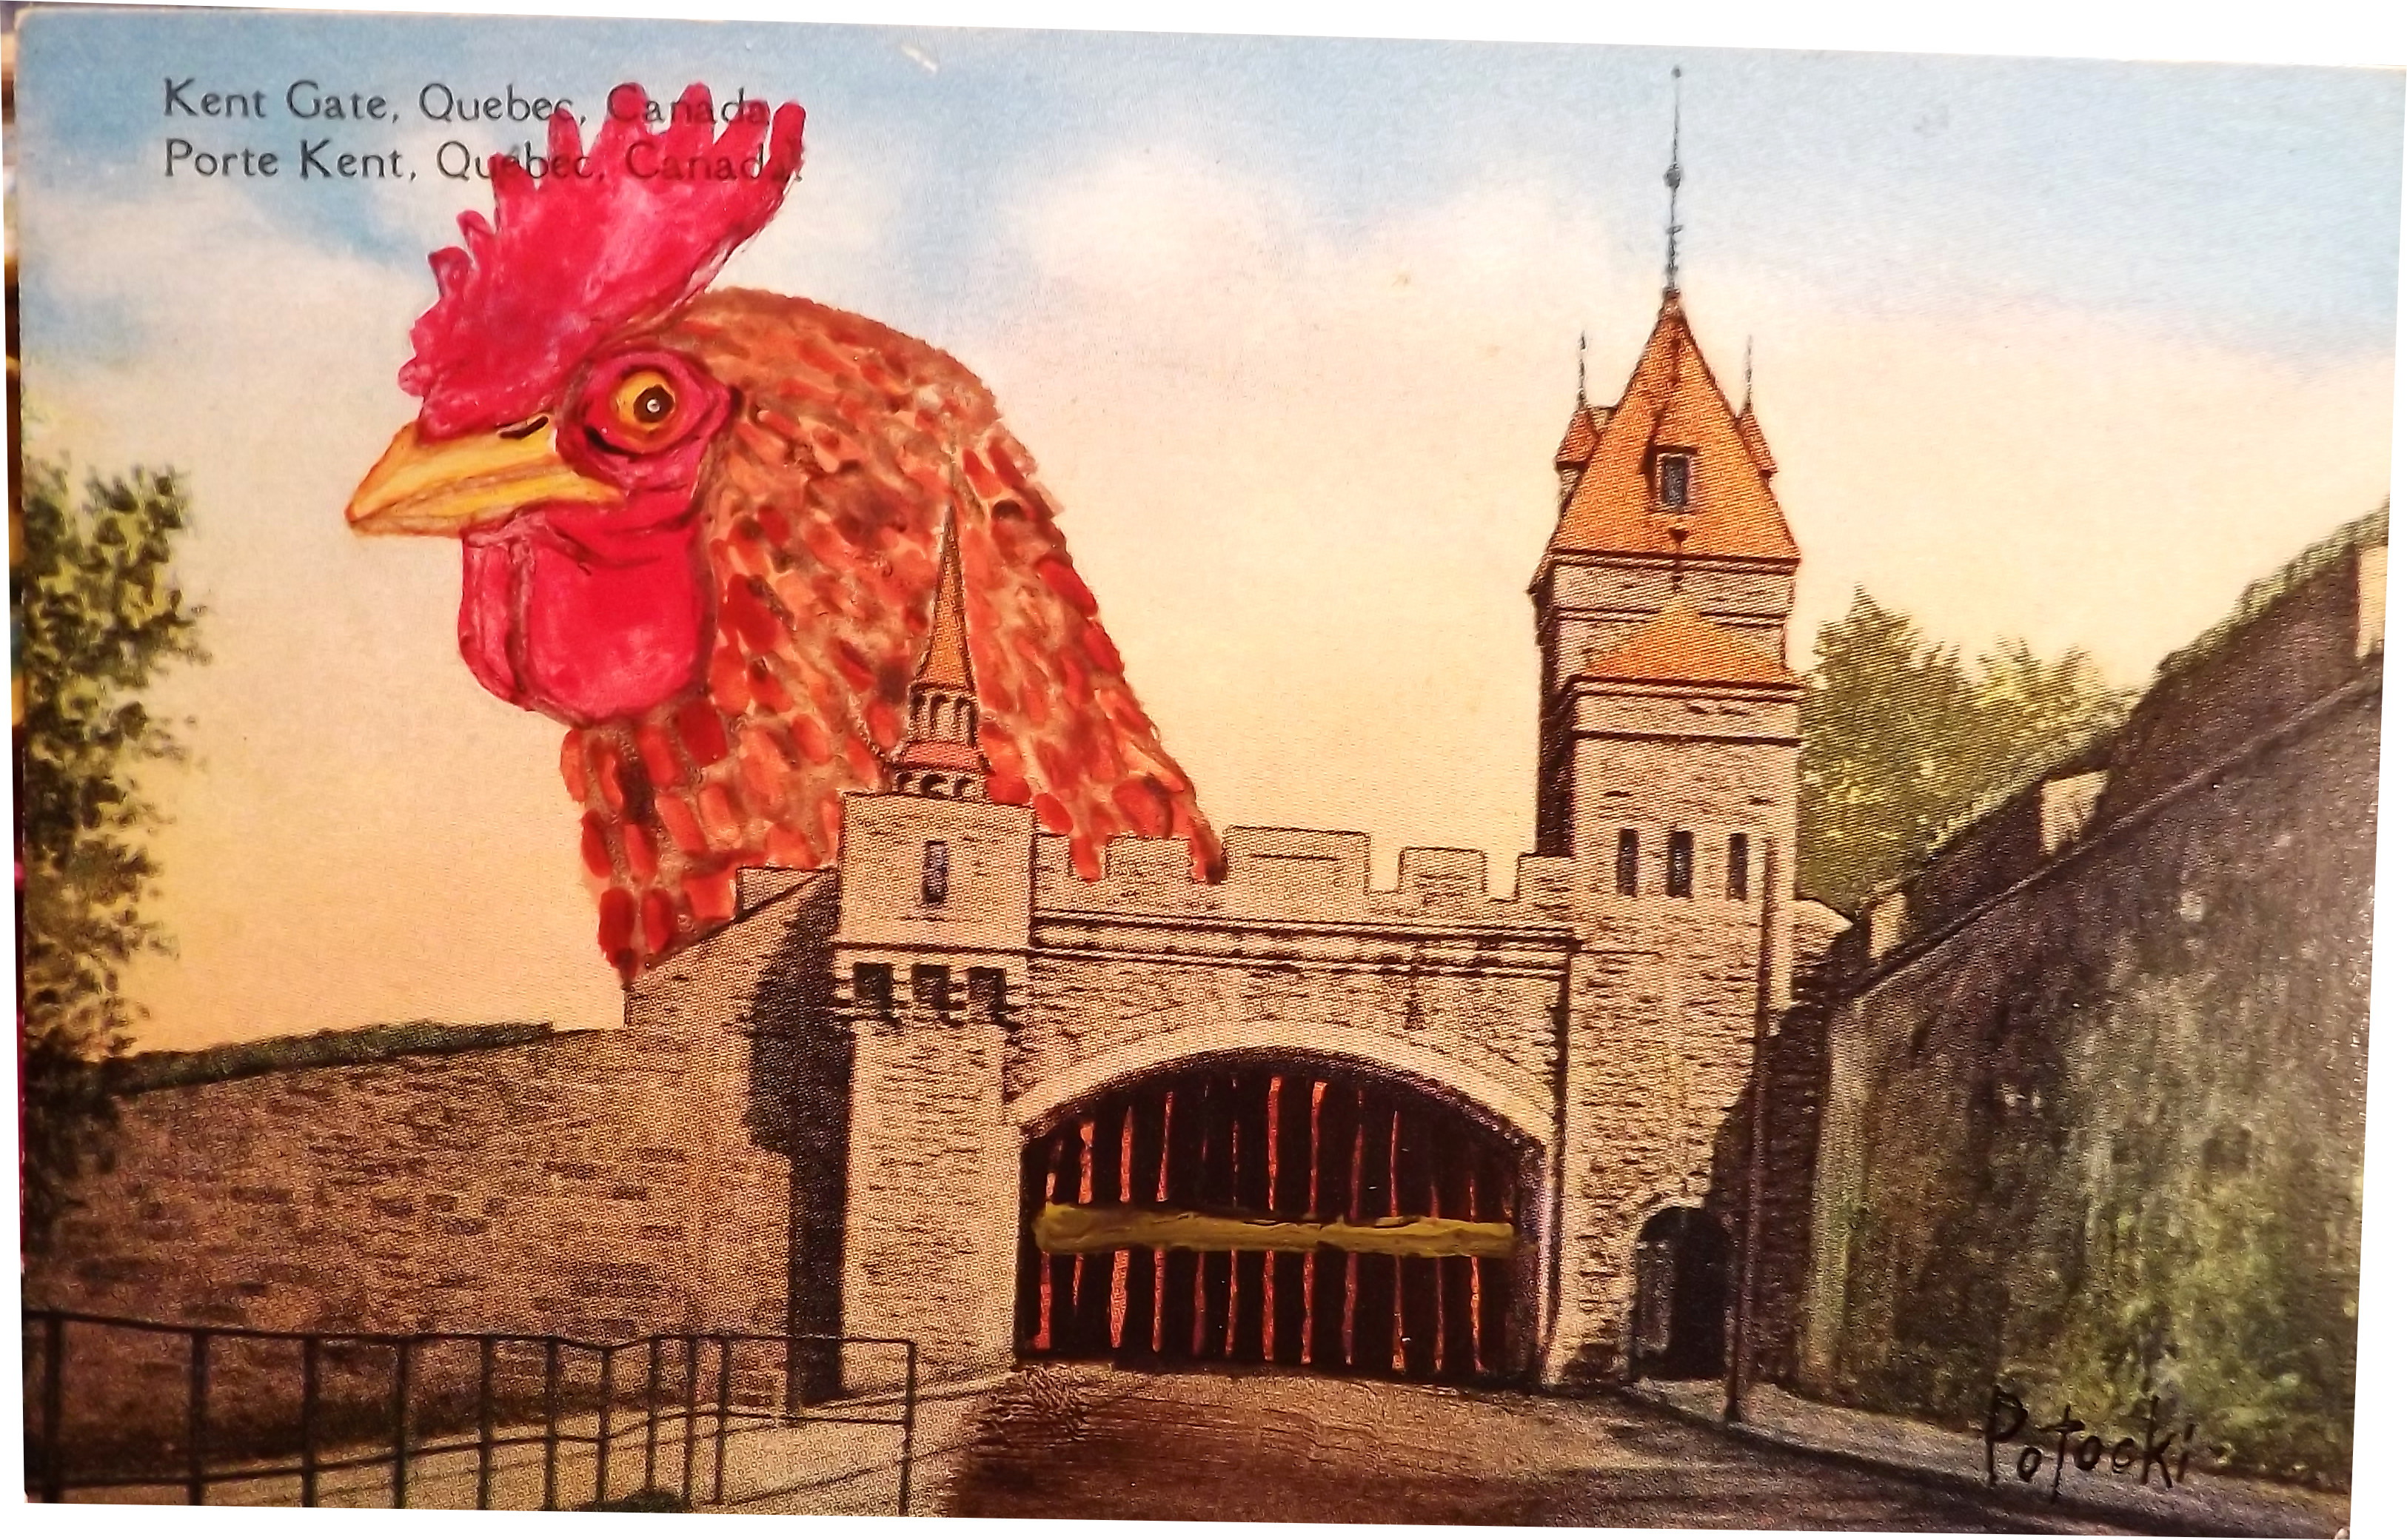 A Giant Chicken Protects Kent Gate in Quebec